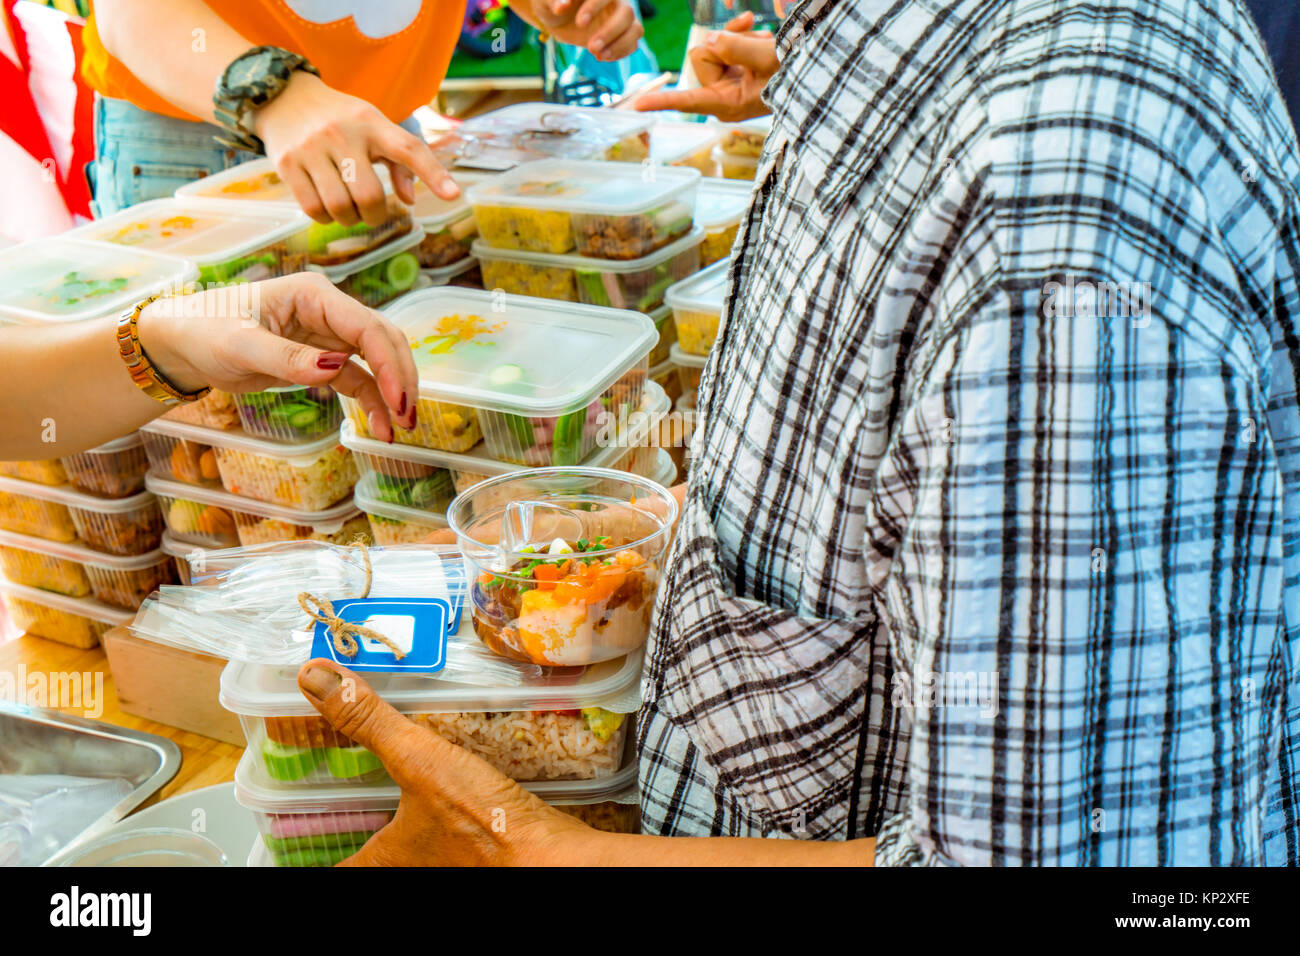 Volunteers giving food to poor people. Poverty concept. Private enterprise charities give food to the underprivileged. Stock Photo